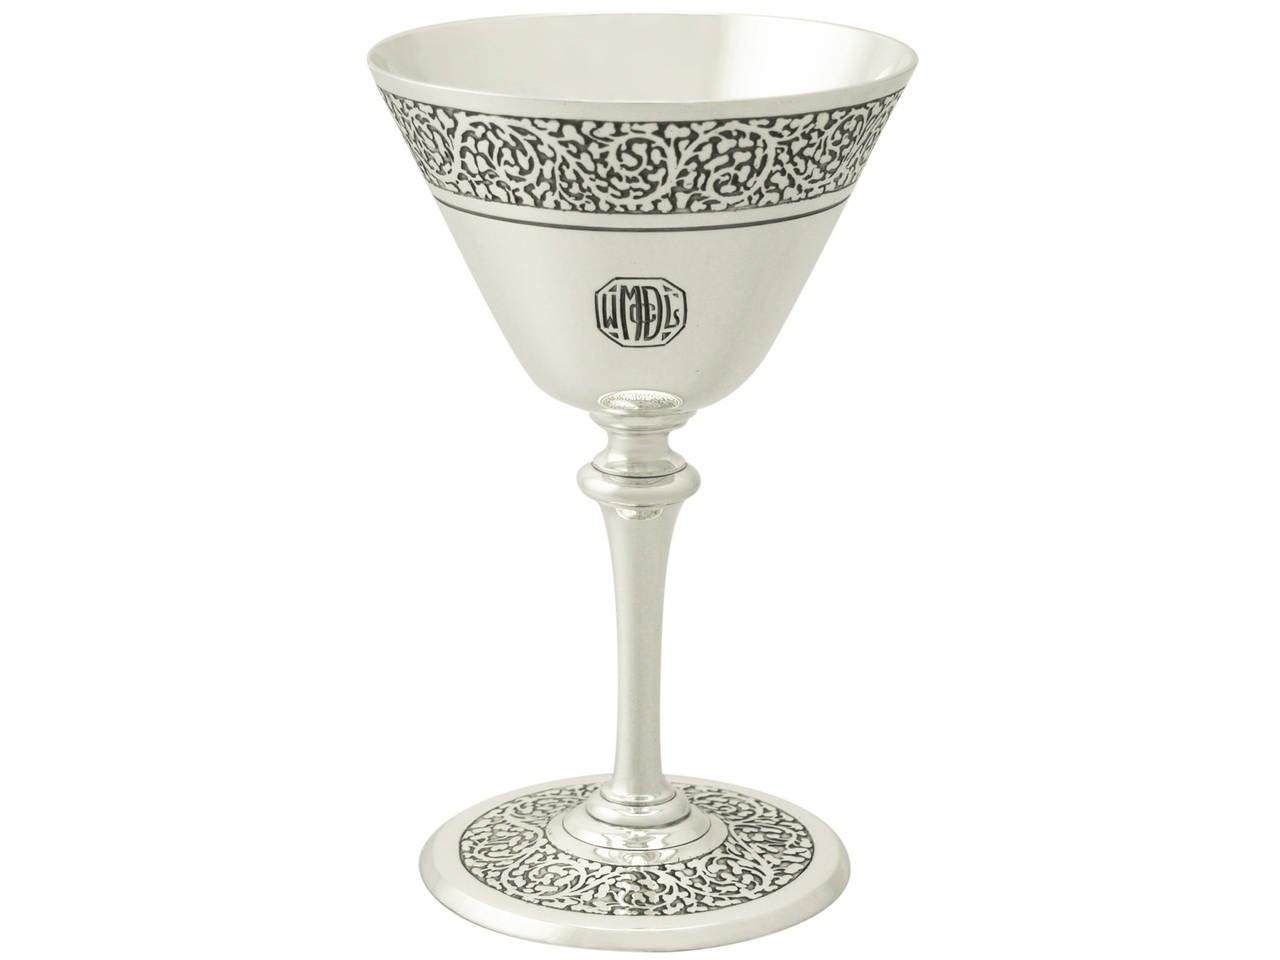 An exceptional, fine and impressive, comprehensive antique American sterling silver cocktail set made by Tiffany & Co in the Art Deco style; an addition to our silver wine and drinks related collection.

This exceptional antique American sterling